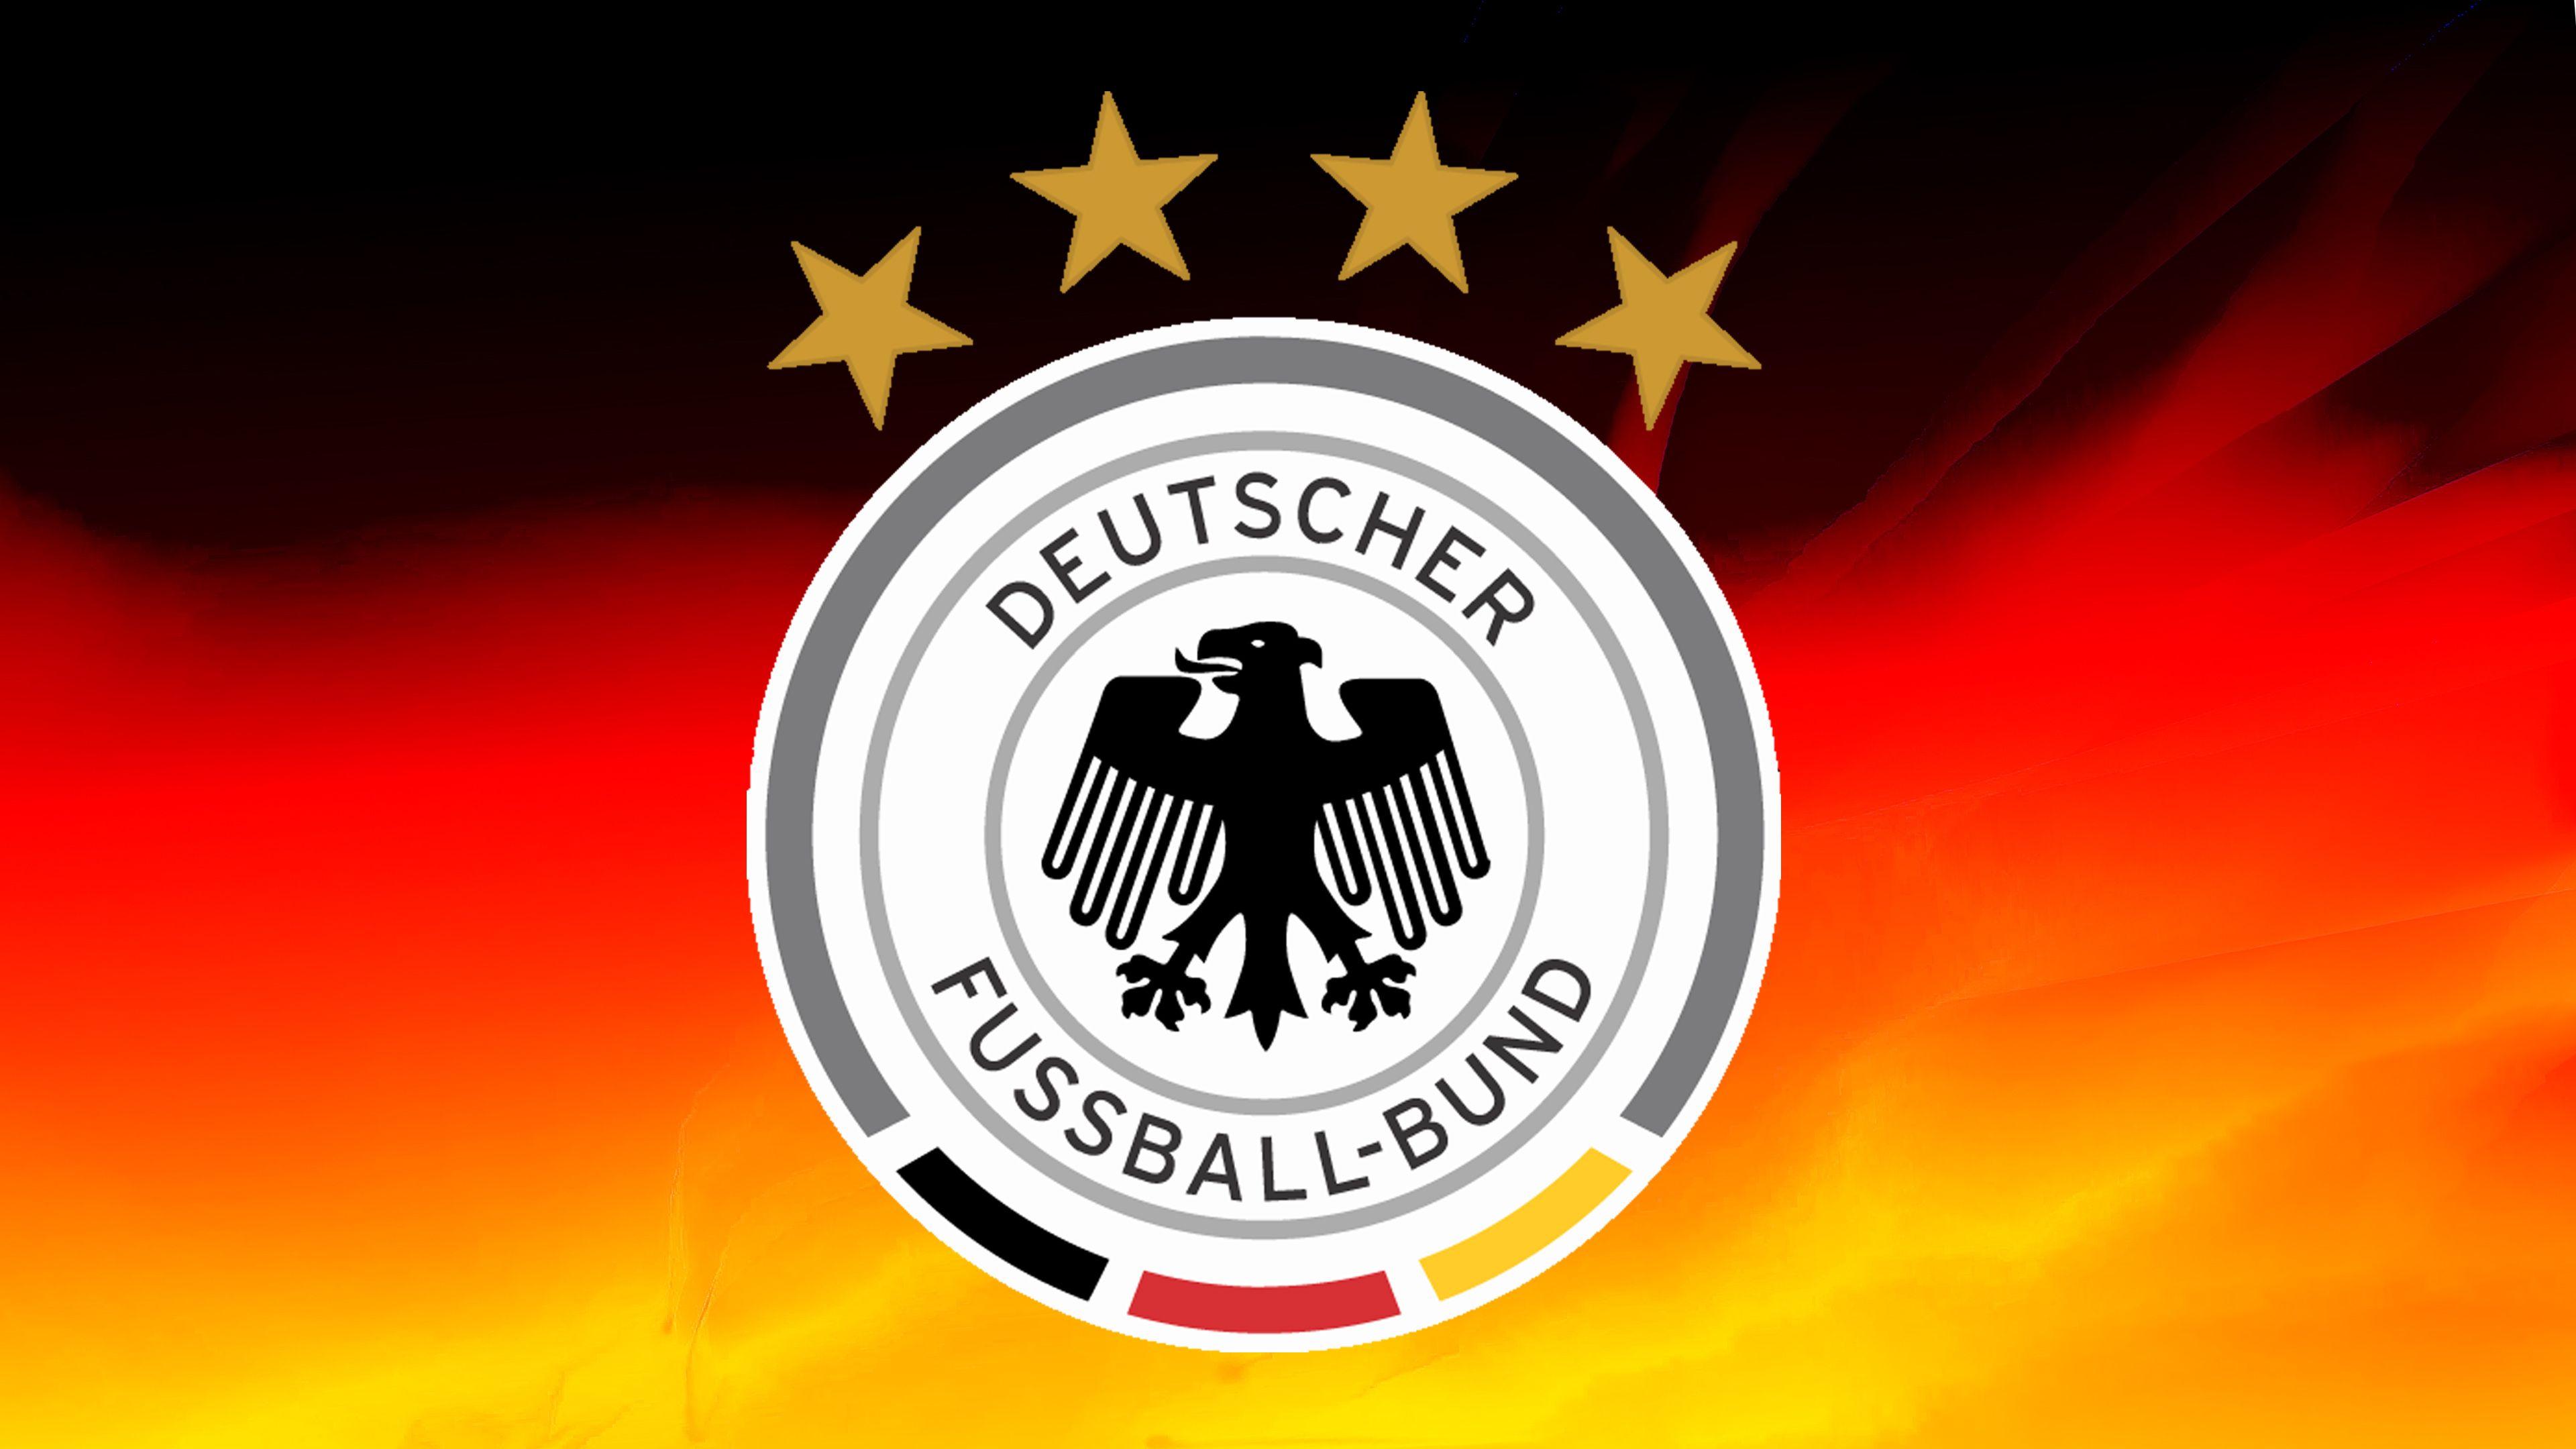 Deutschland Logo - Germany Football Logo Wallpaper with 4 Stars and National Flag - HD ...